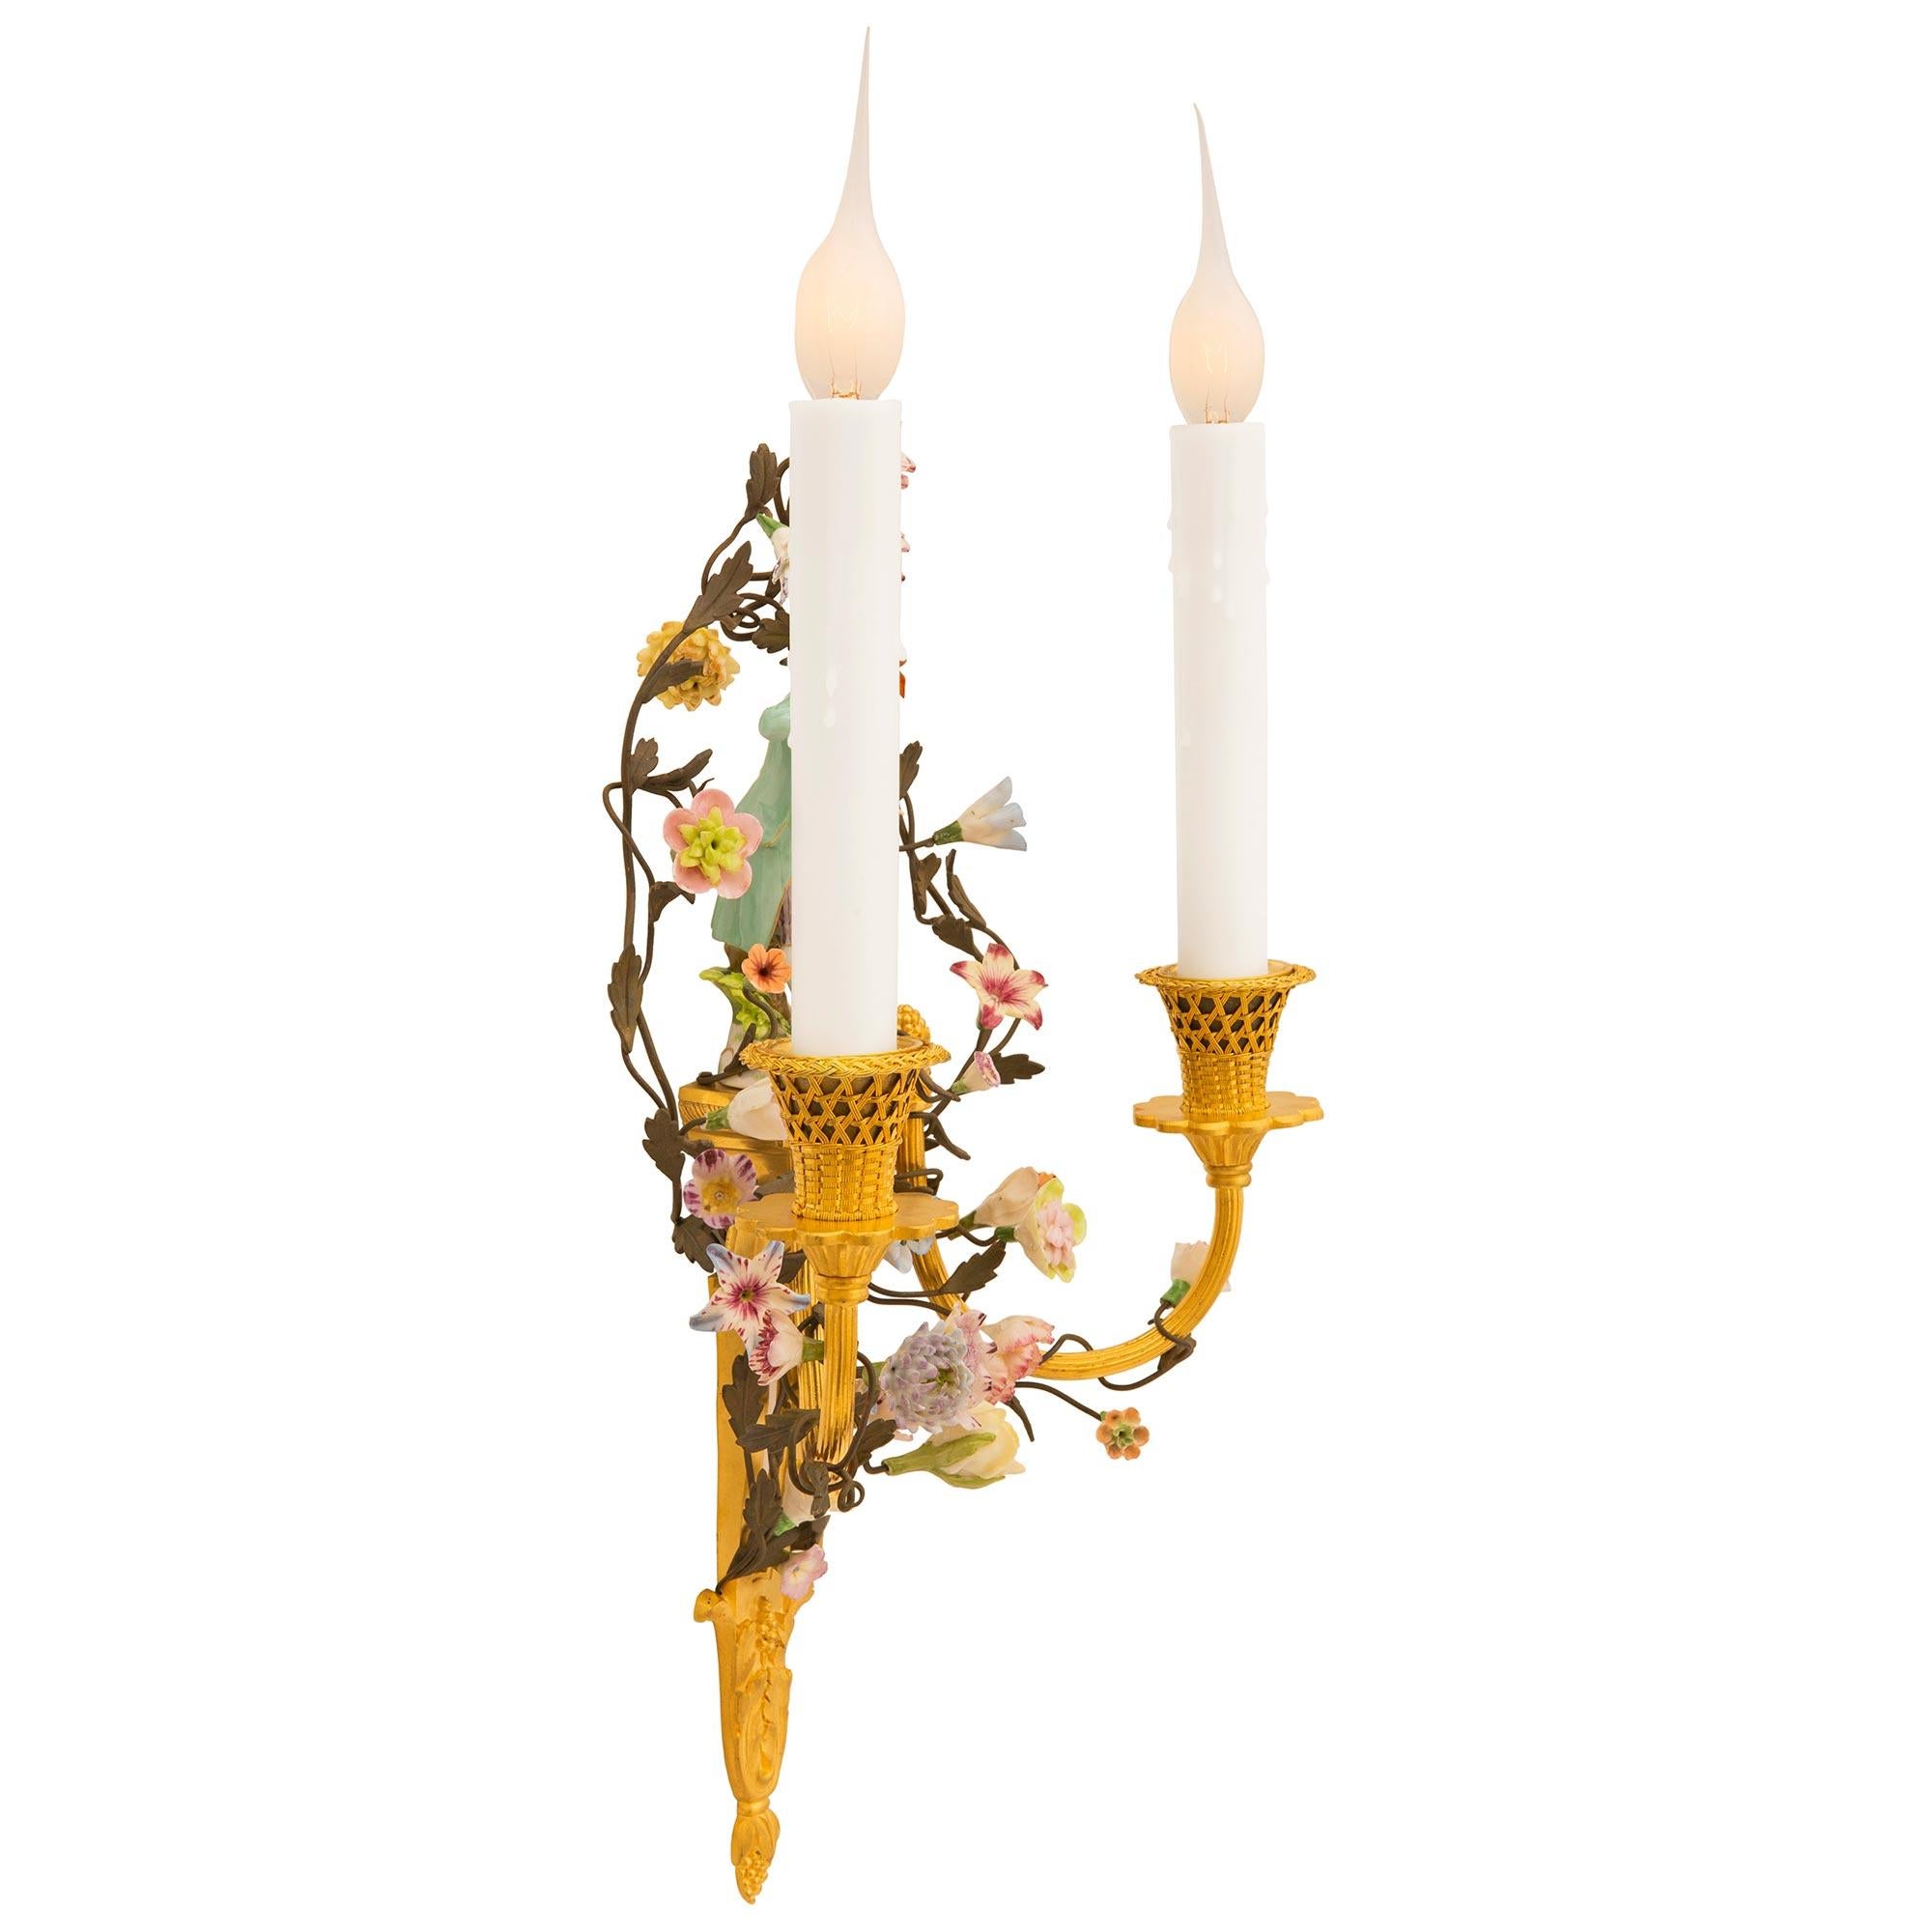 A charming and extremely decorative French 19th century Louis XV st. ormolu, tole and Sèvres Porcelain sconces. Each sconce is centered by an elegant bottom acorn finial below beautiful richly chased scrolled acanthus leaves leading up the elegant